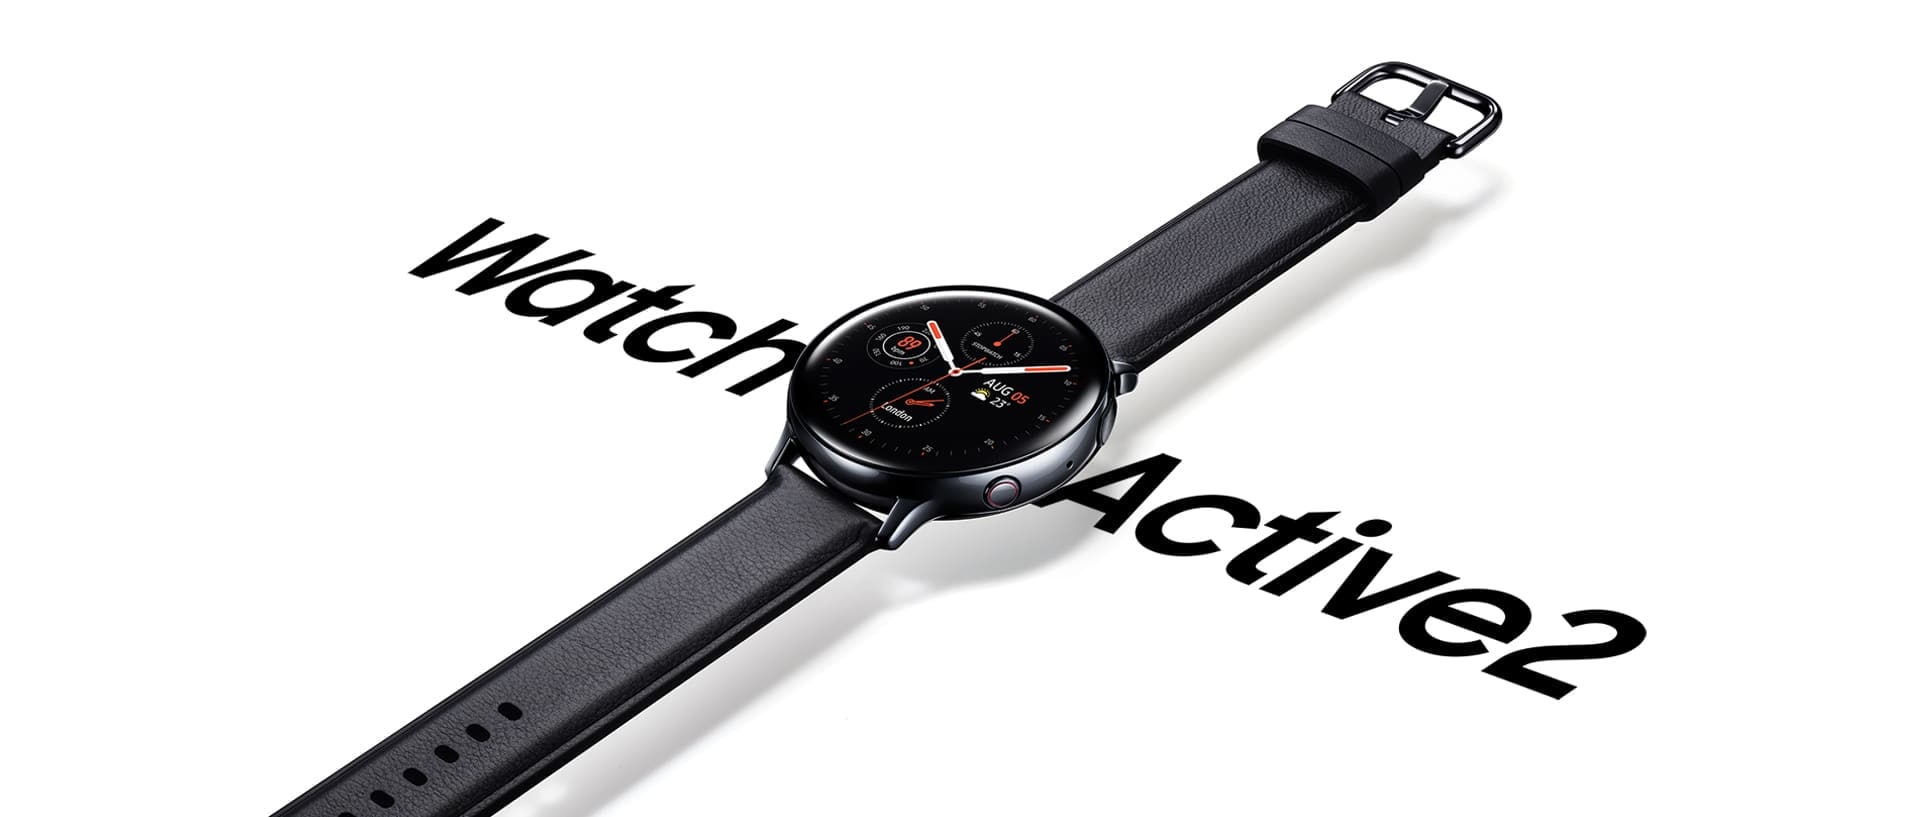 A stainless black Galaxy Watch Active2 with black leather strap that hangs over the words 'Watch Active2' in large font below.